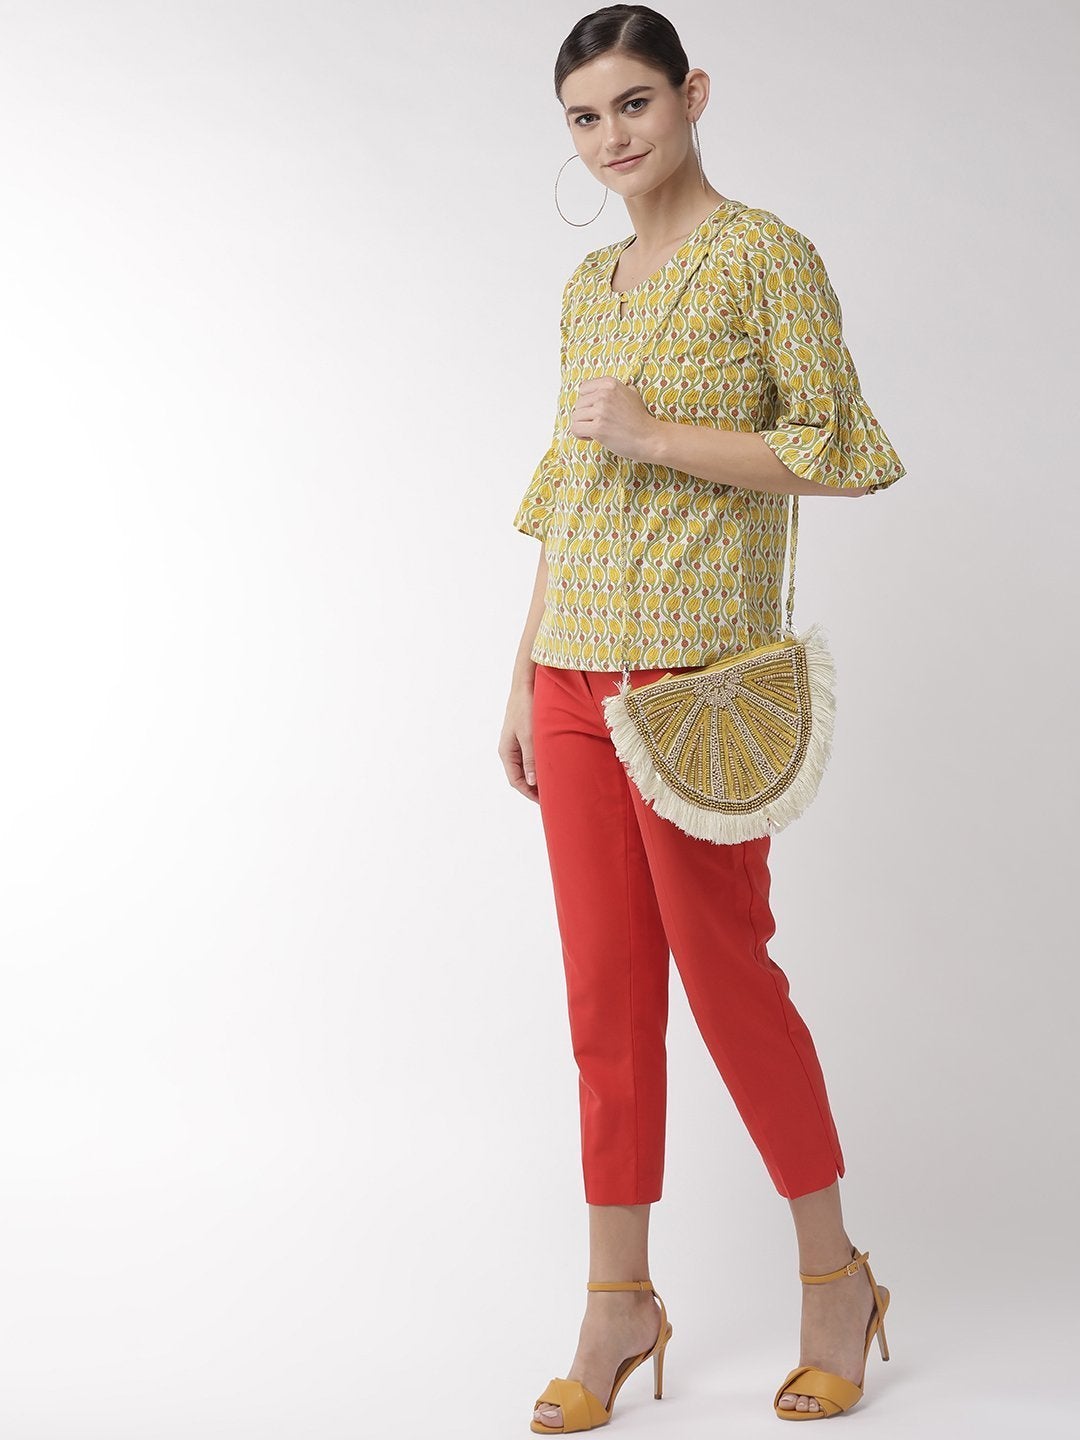 Women's Yellow Floral Bell Sleeves Top - InWeave